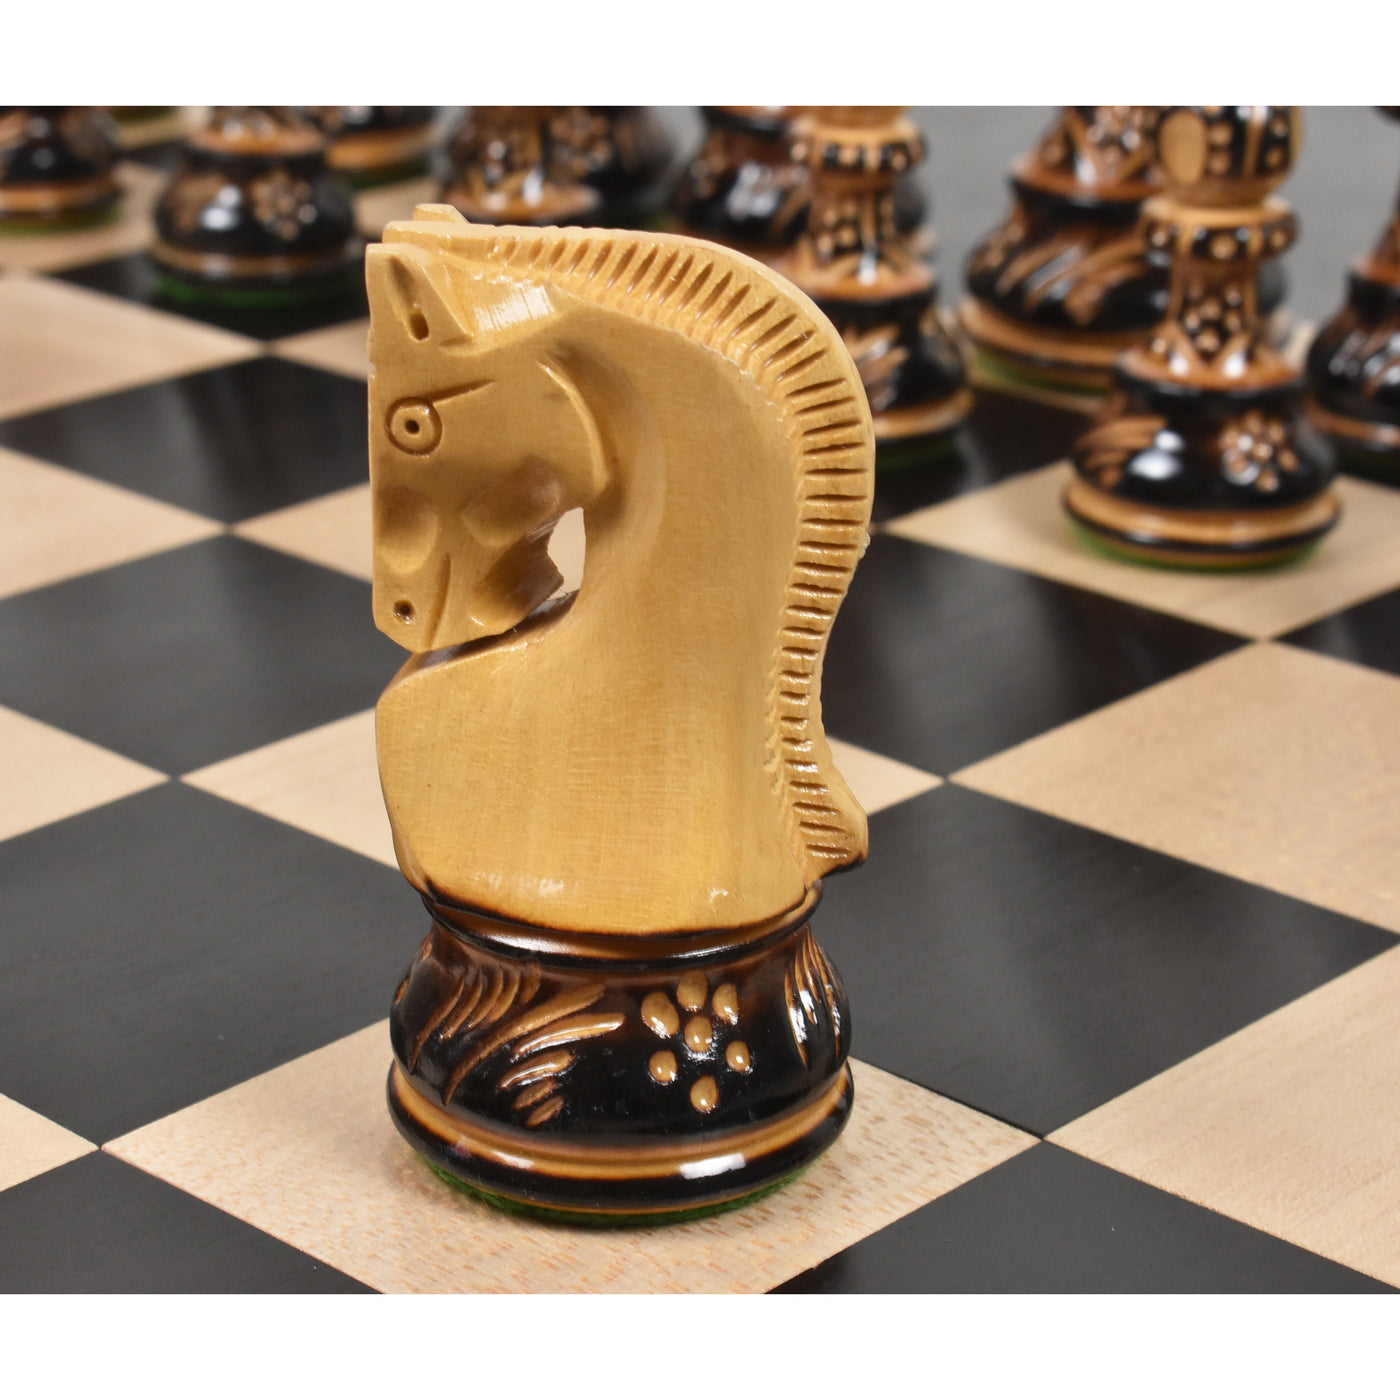 Artisan Carving Burnt Zagreb Chess Pieces with Border